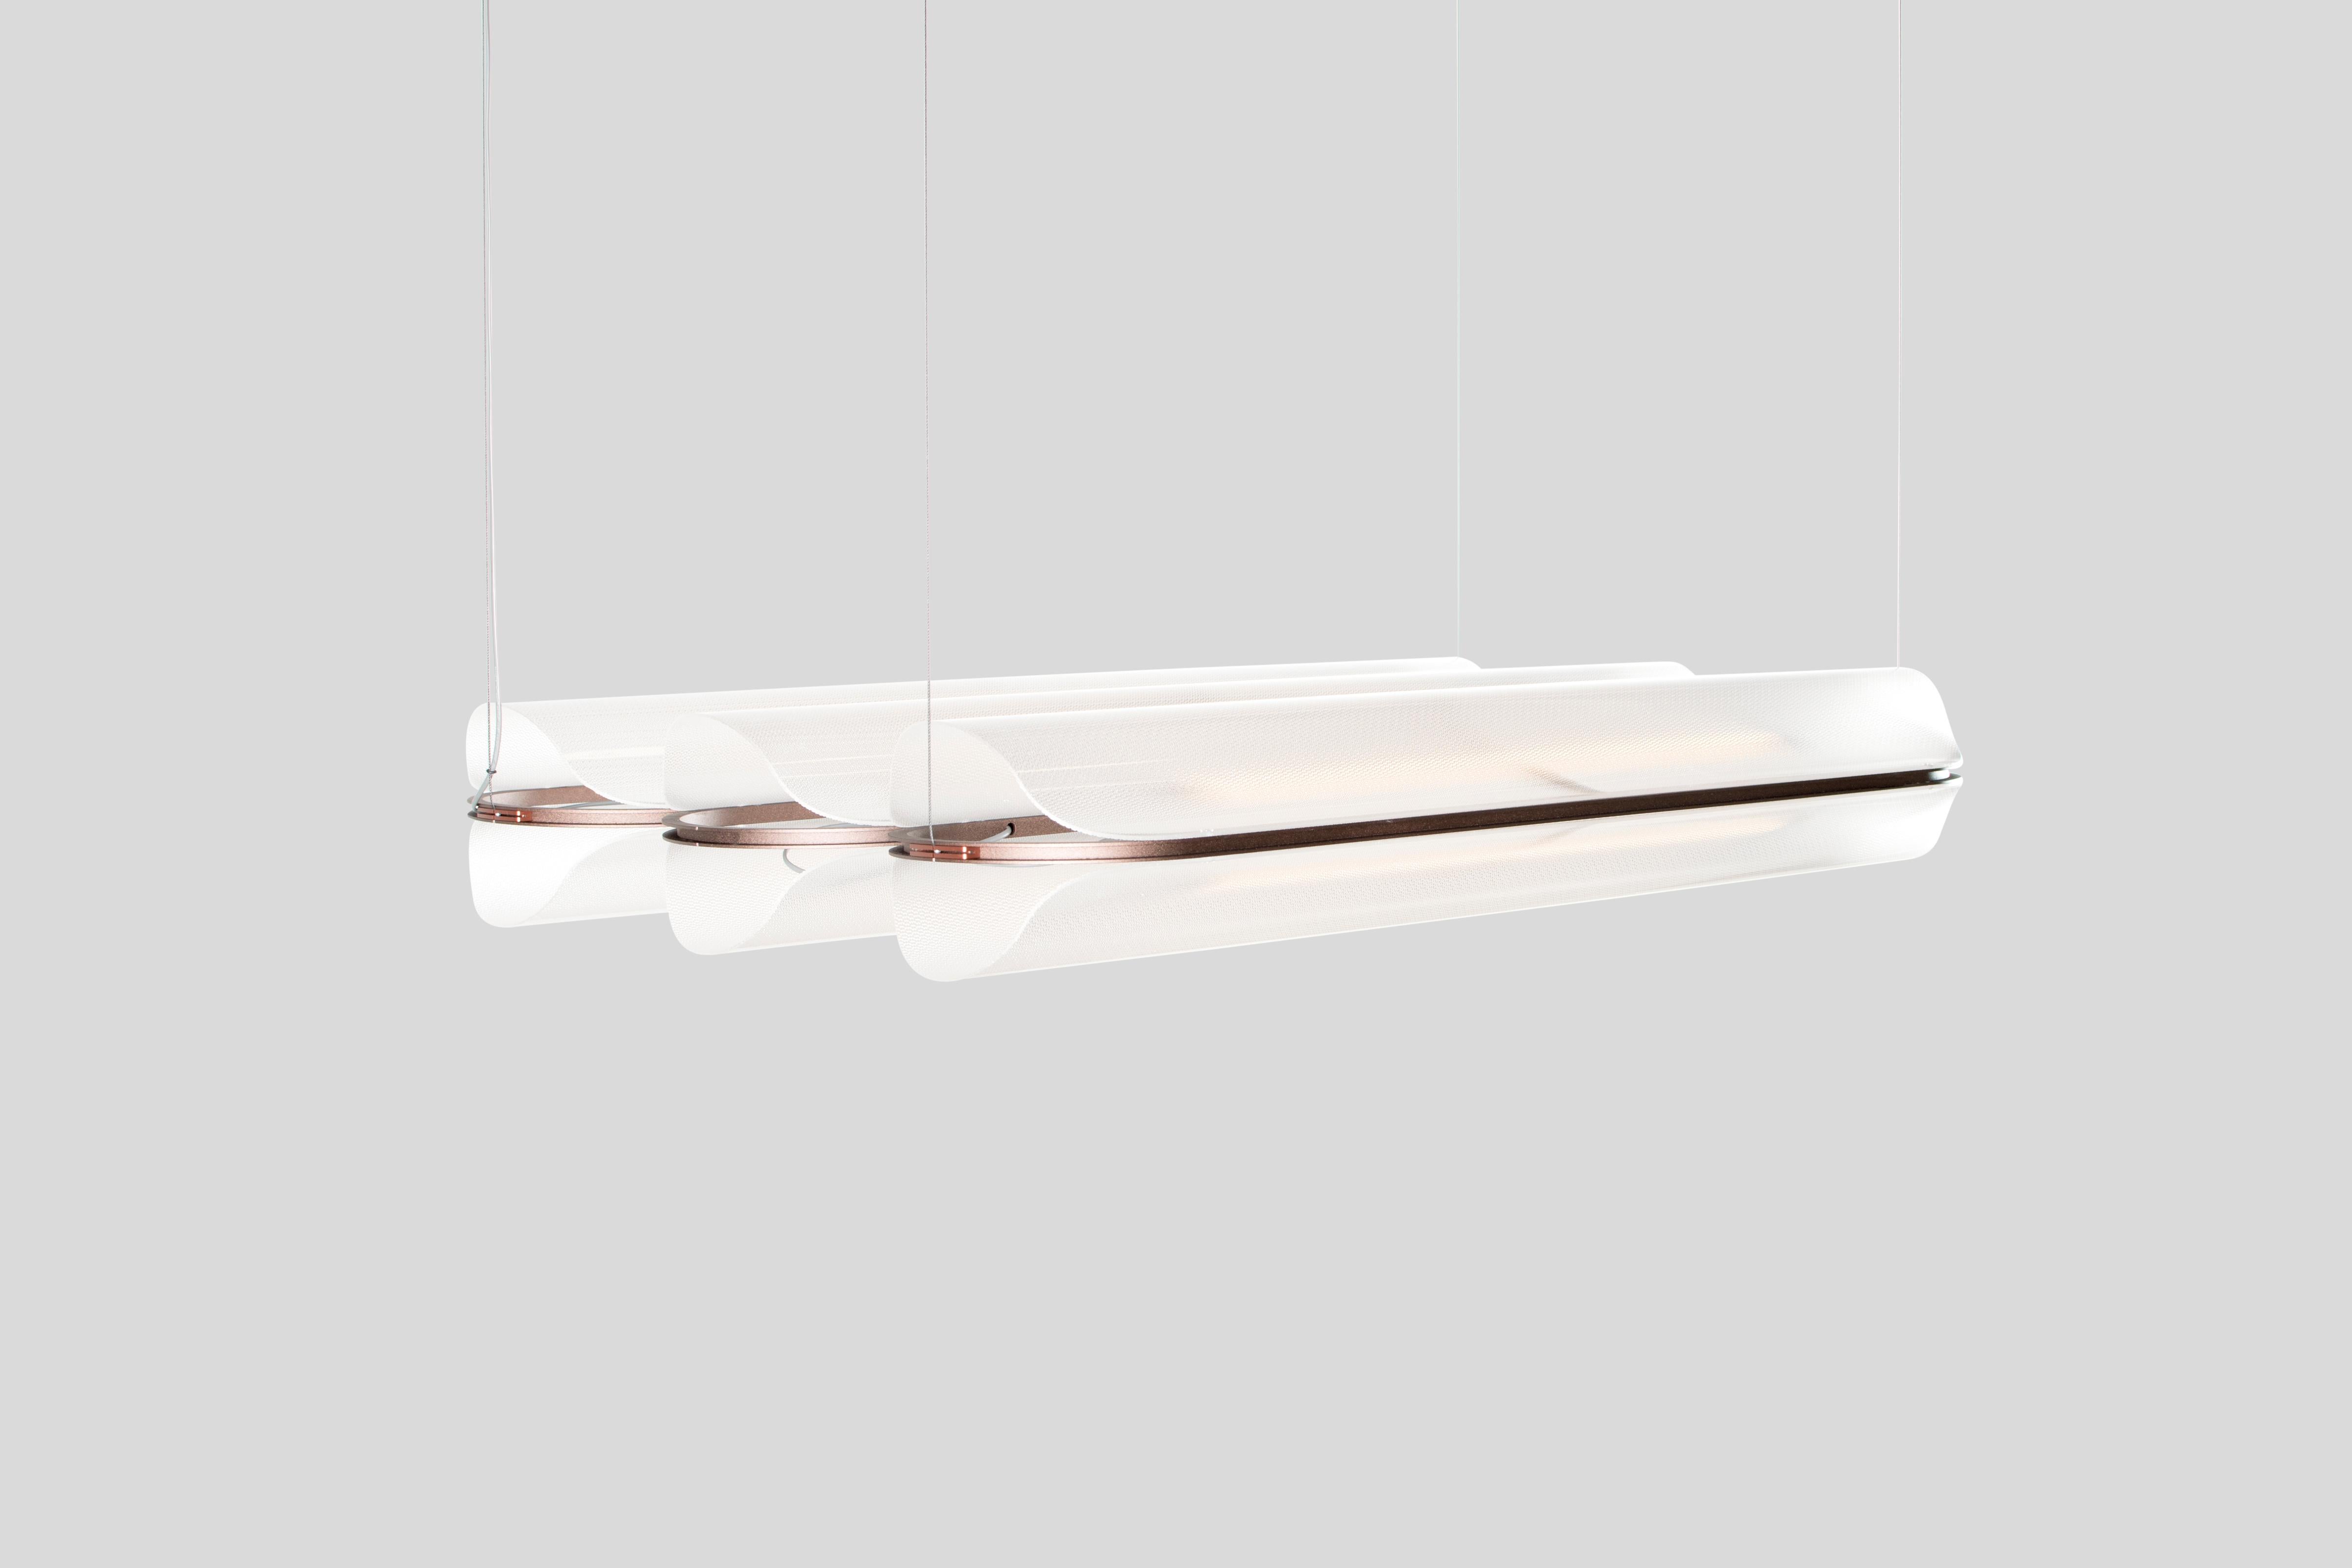 VALE - Pendant lamp
Design: Caine Heintzman, Editor: ANDLight

The Vale series optimises functionality through its multidirectional luminescence while diffusing soft ambient light.

Materials:
– Acrylic
– Aluminum

Dimensions:
102 x 30 x